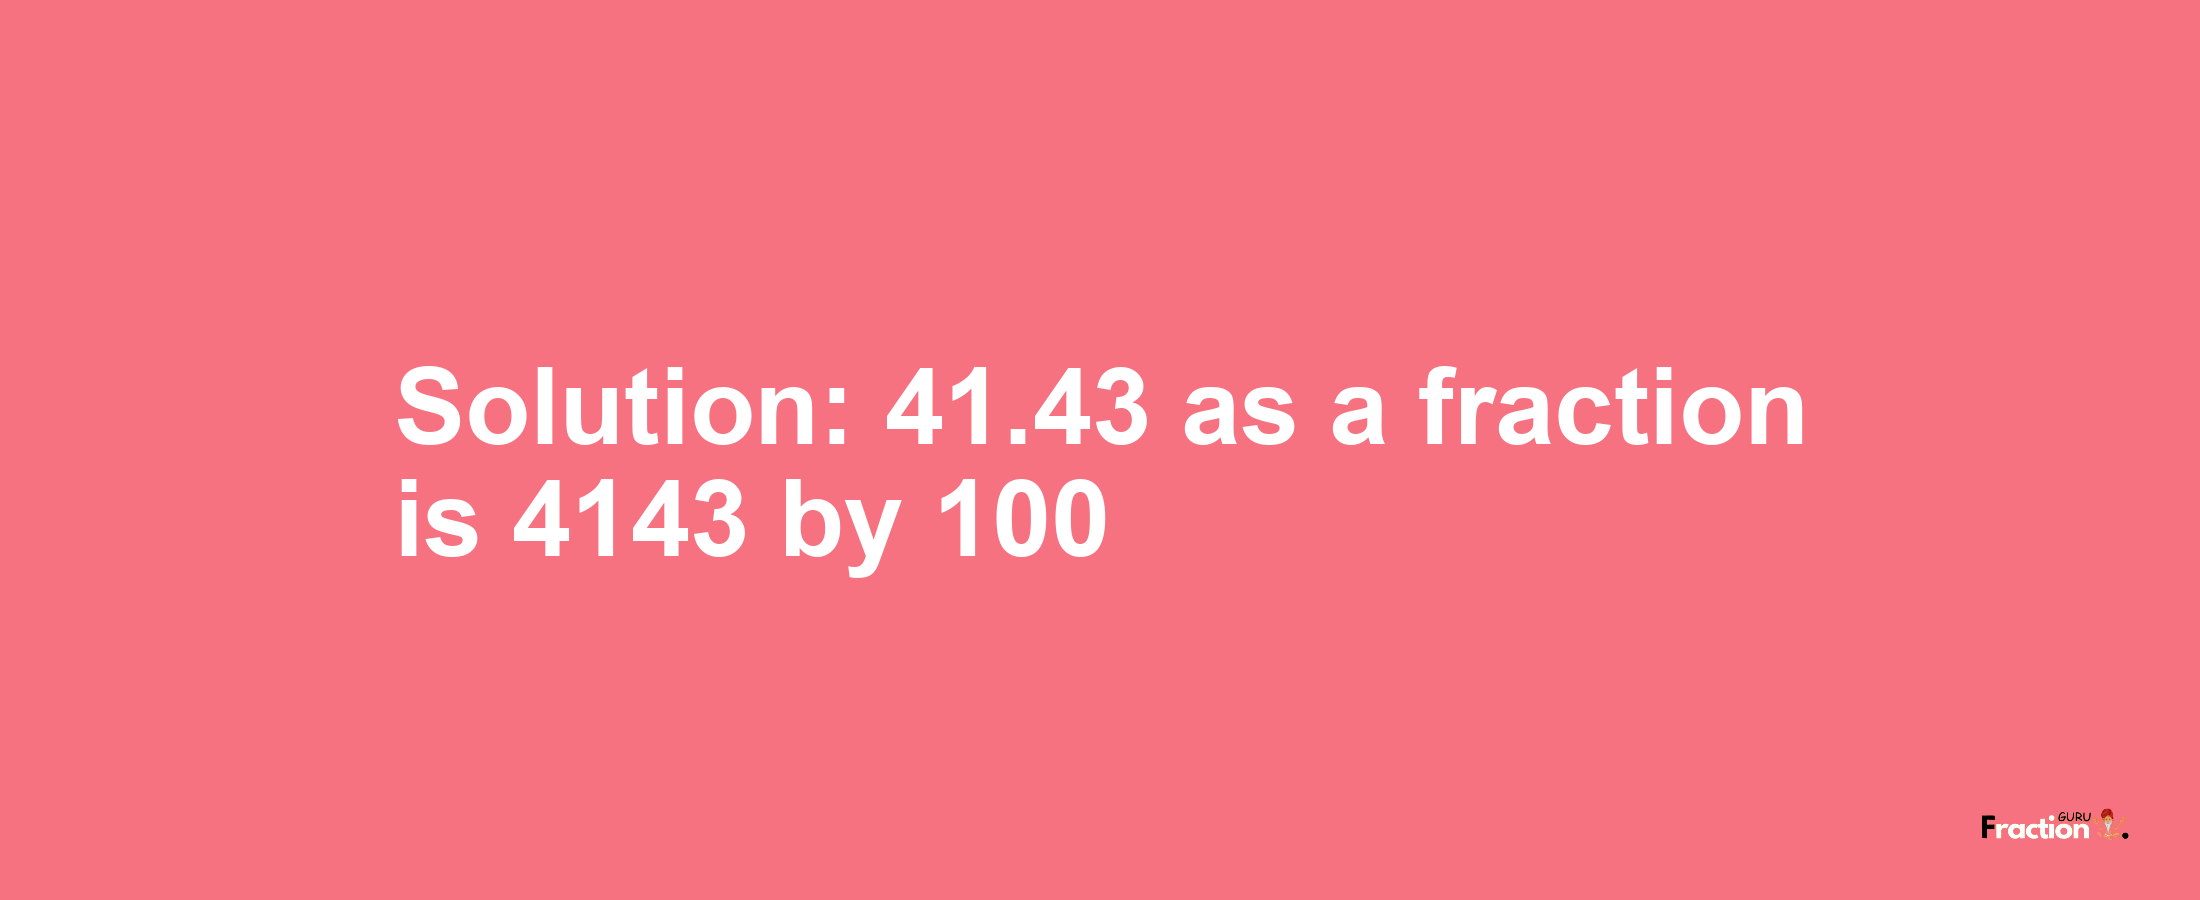 Solution:41.43 as a fraction is 4143/100